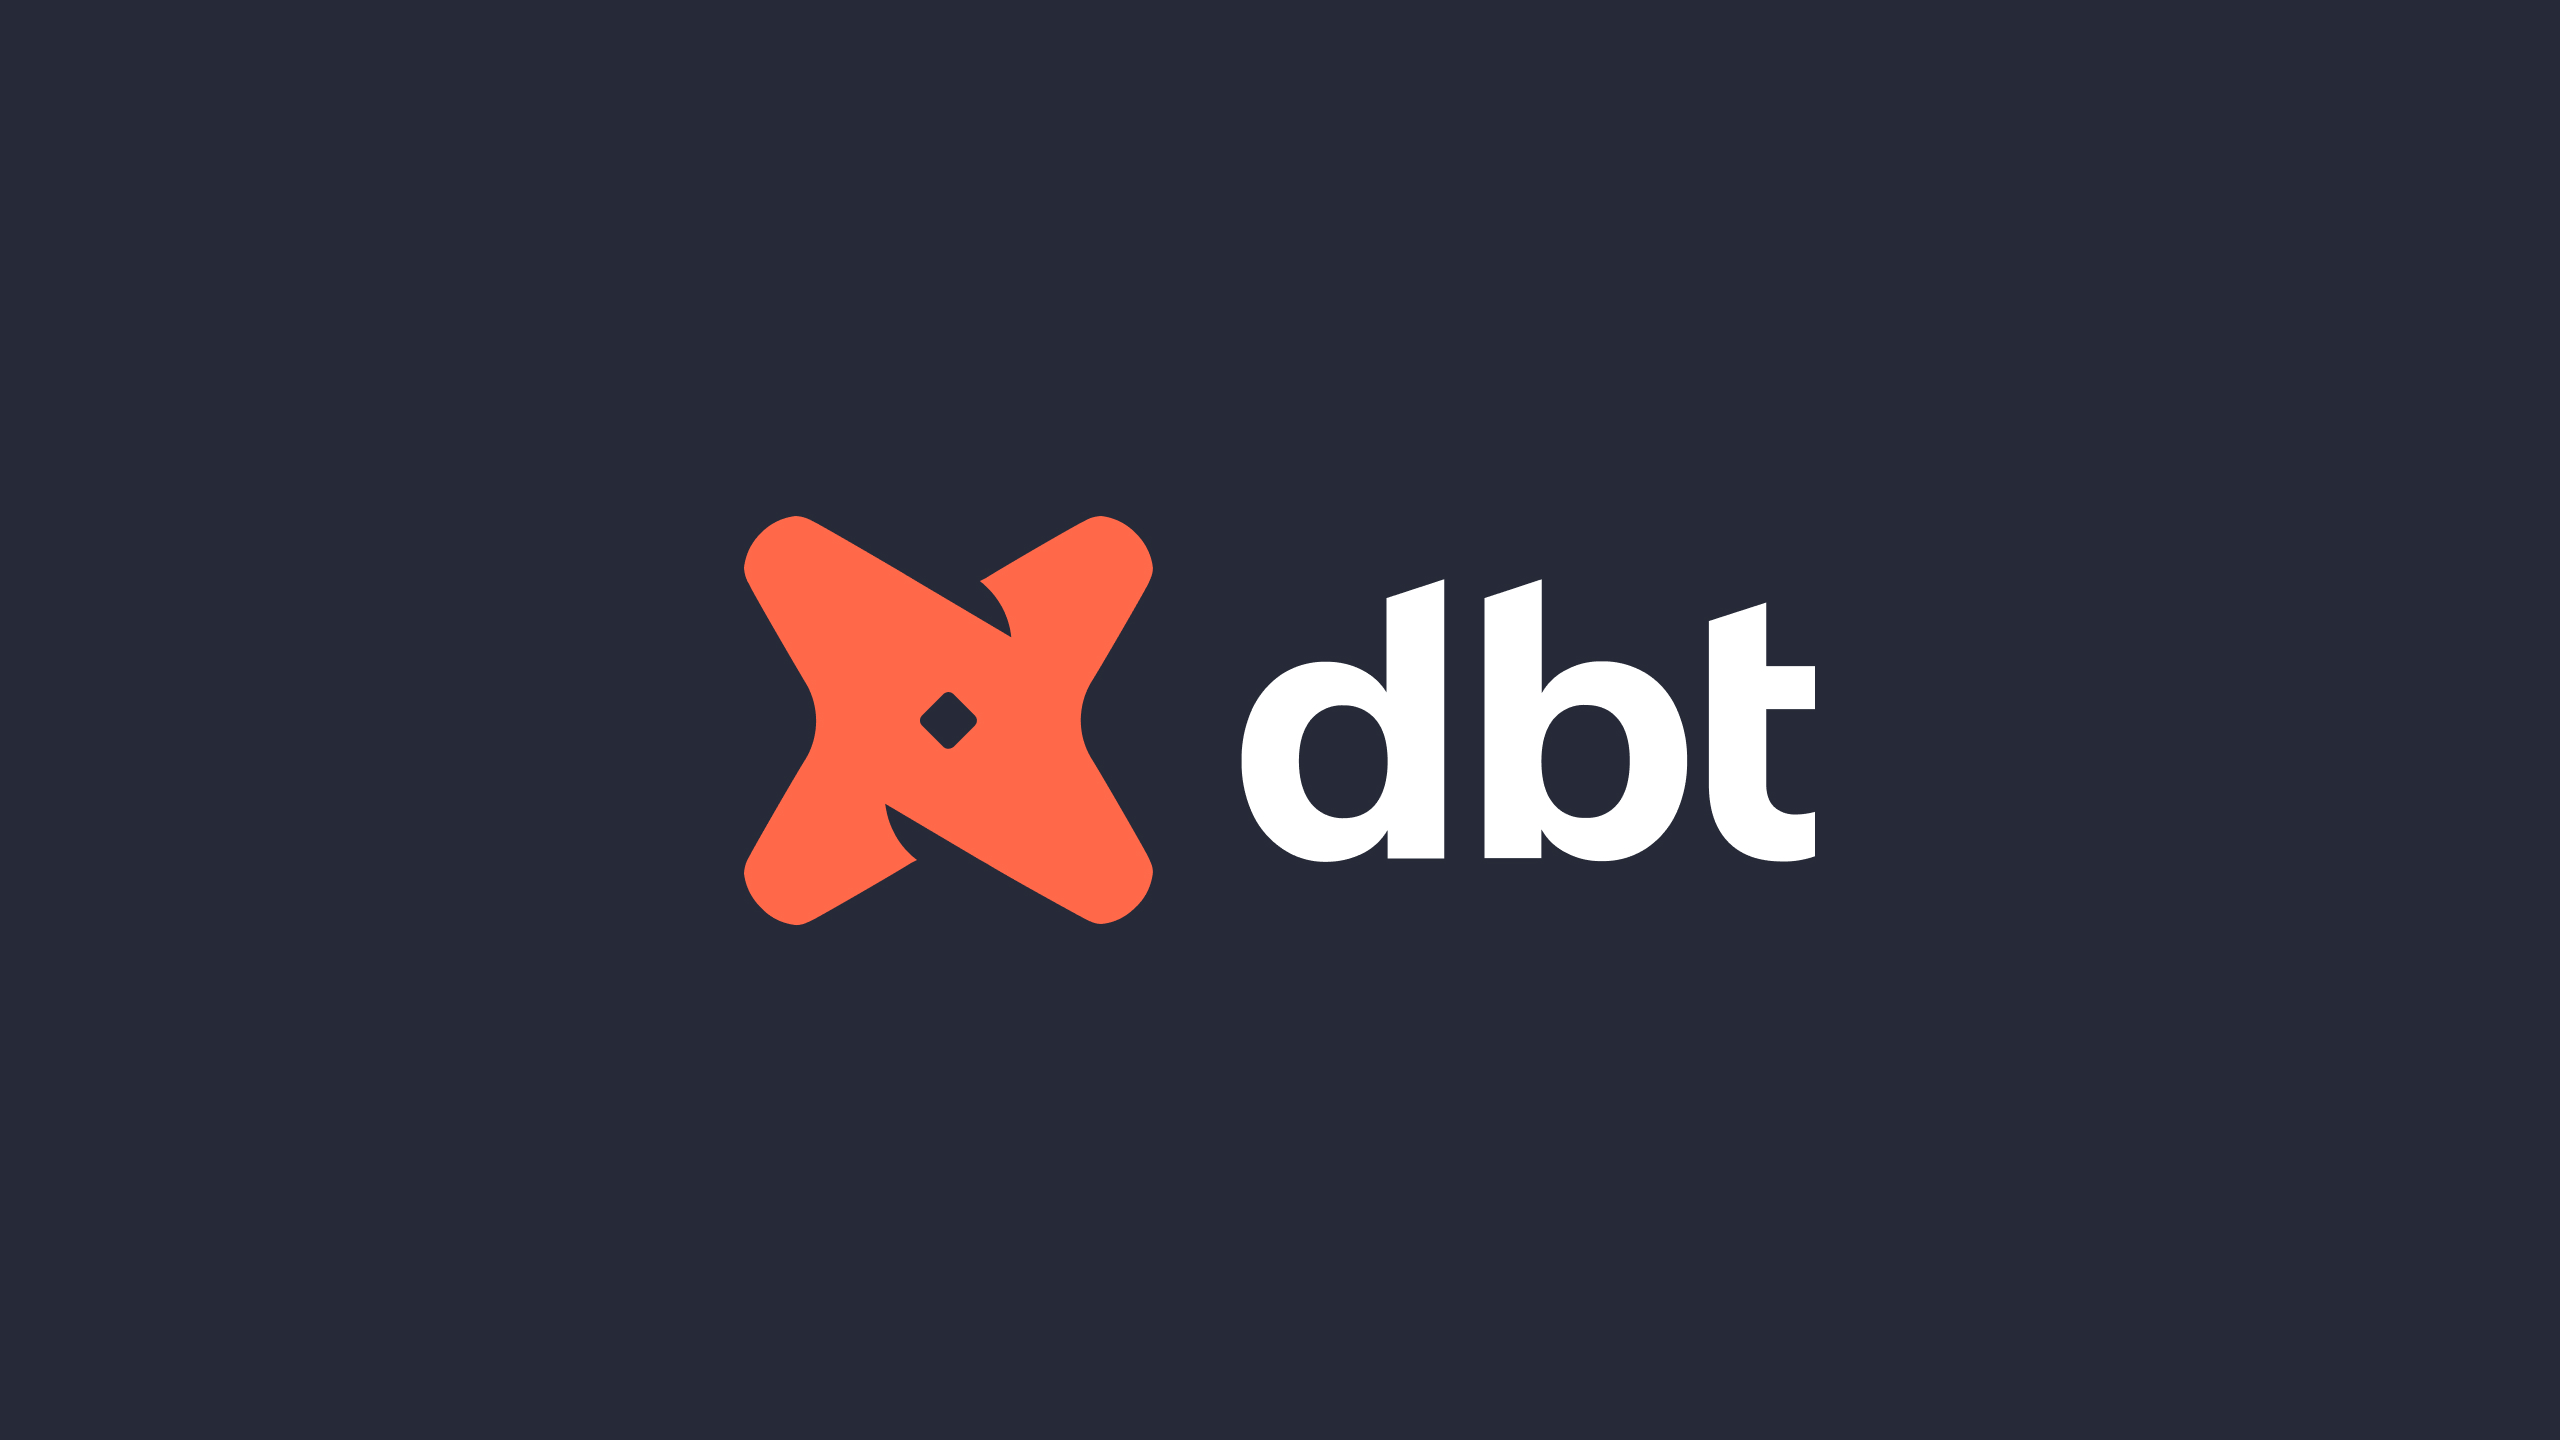 Introducing support for Python, dbt’s second language